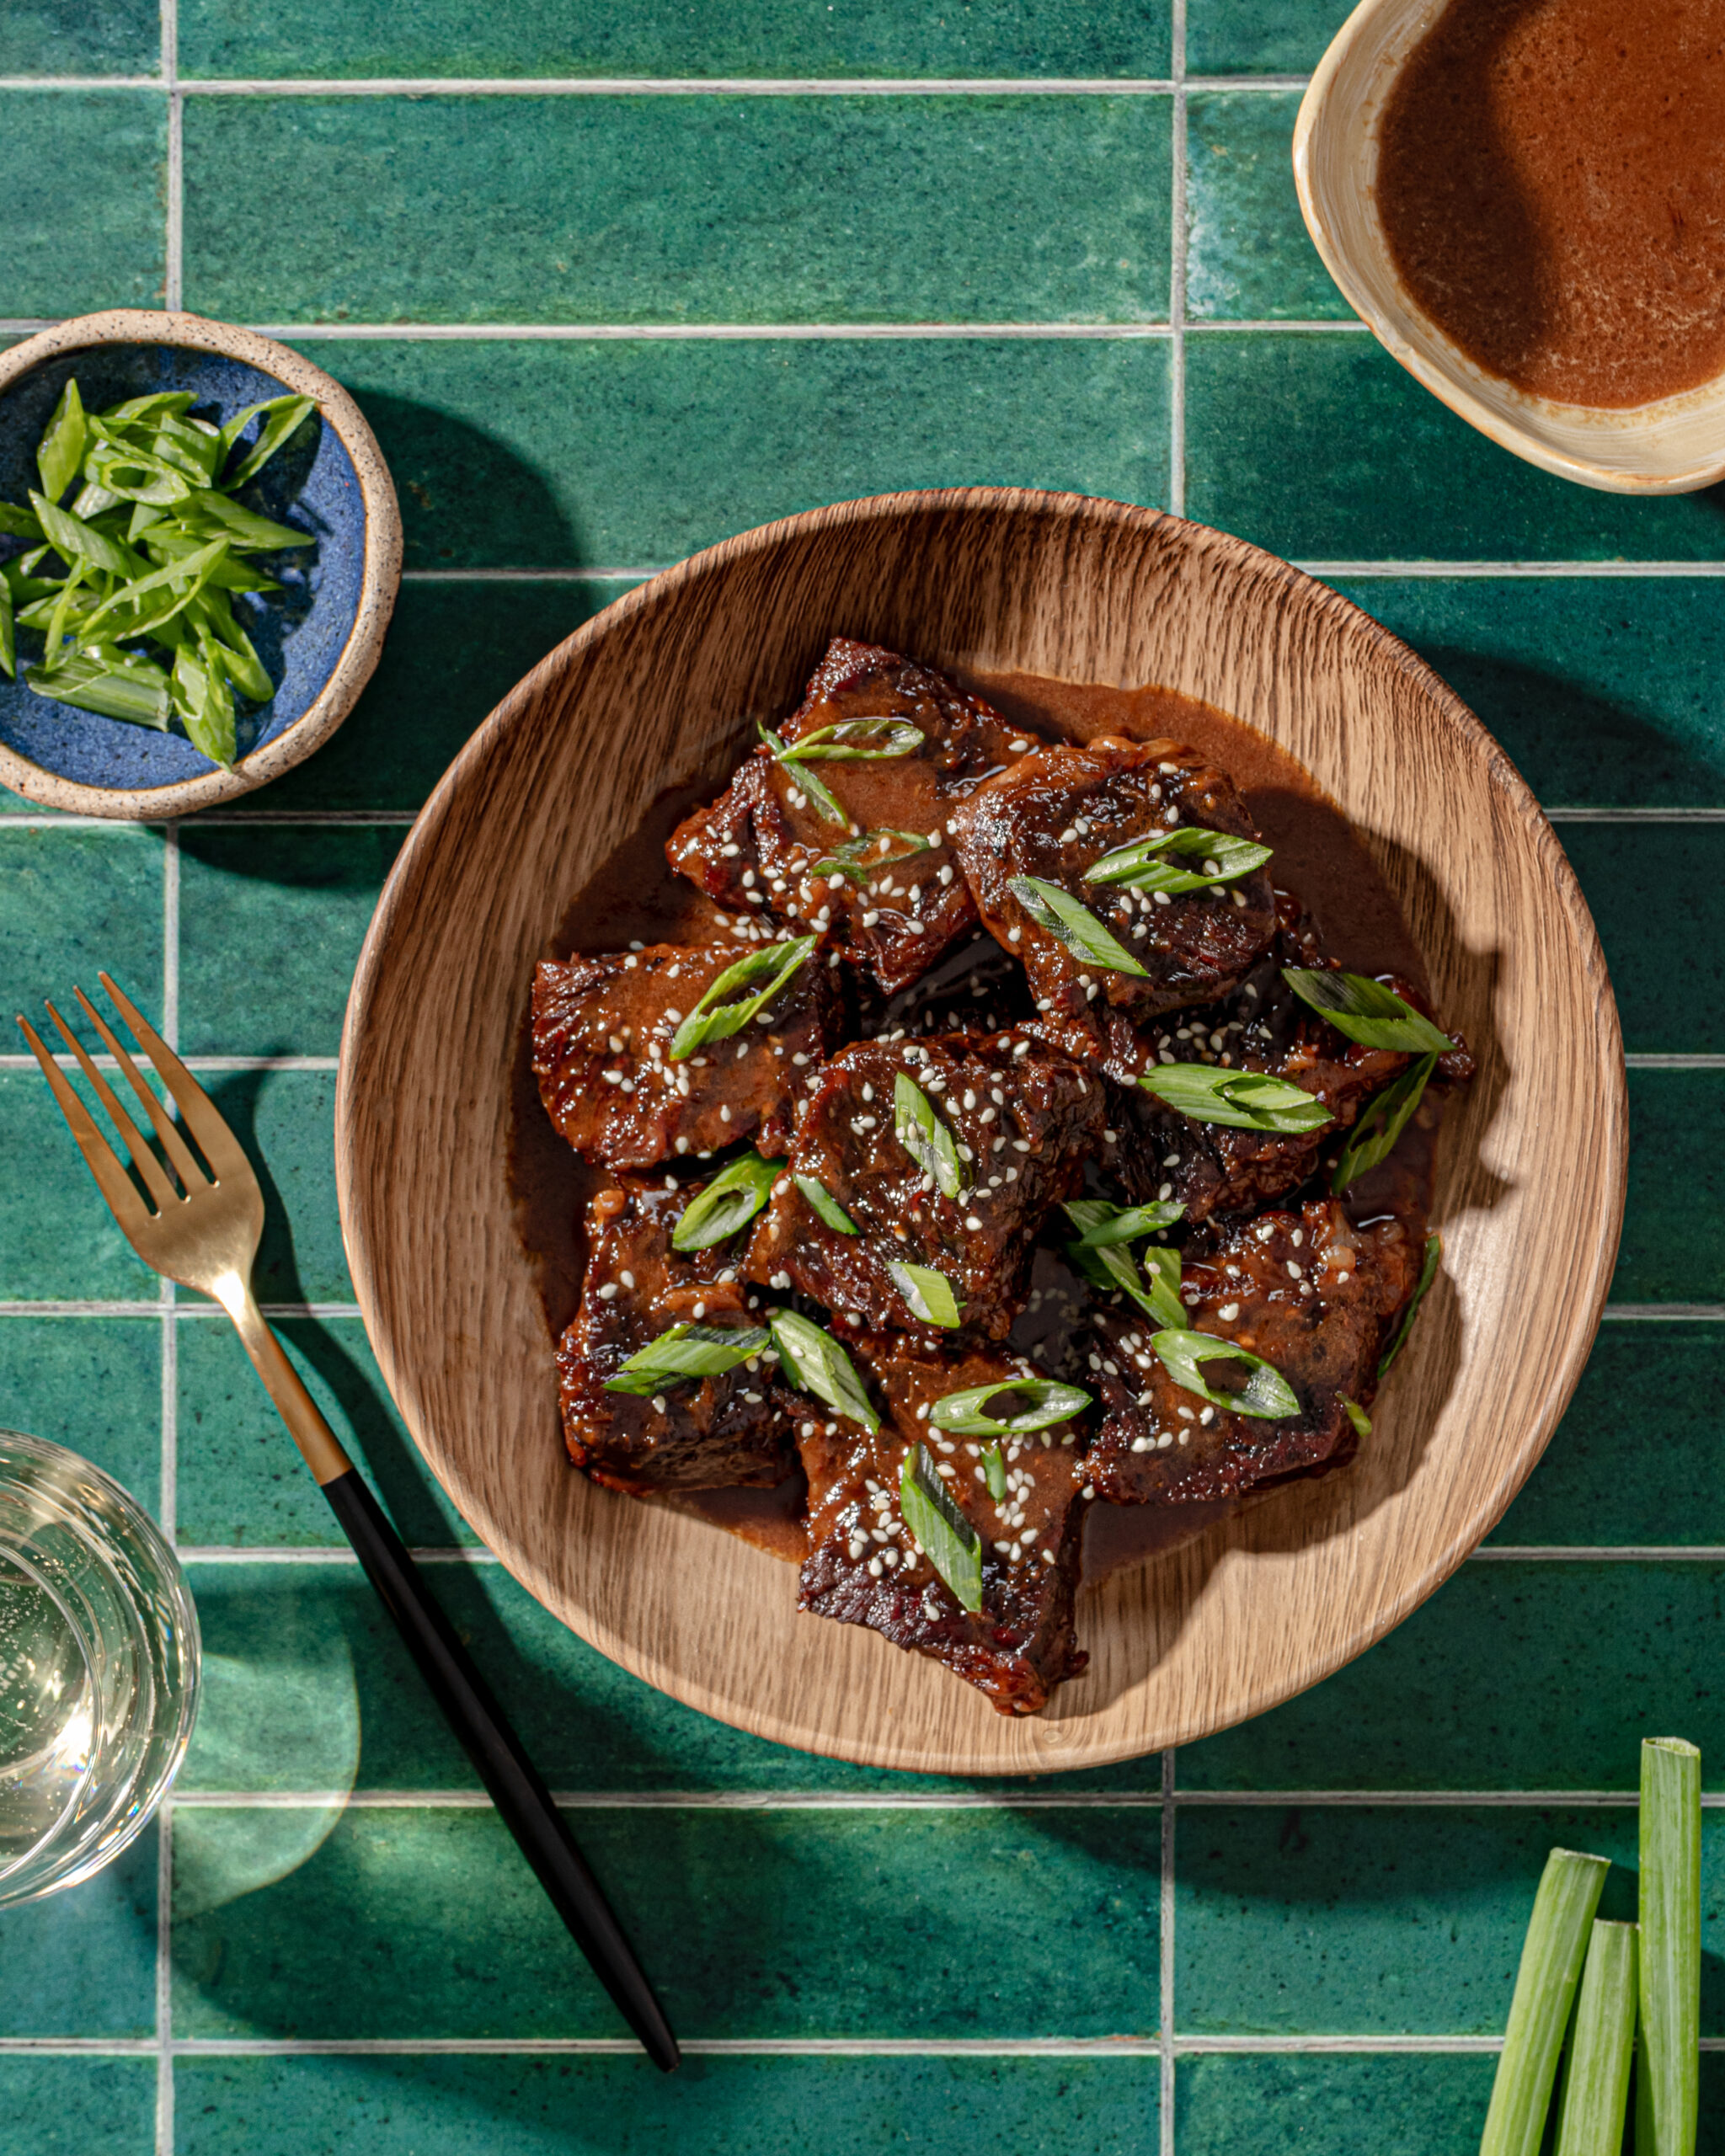 Asian short ribs in a wooden bowl with sauce and garnish.